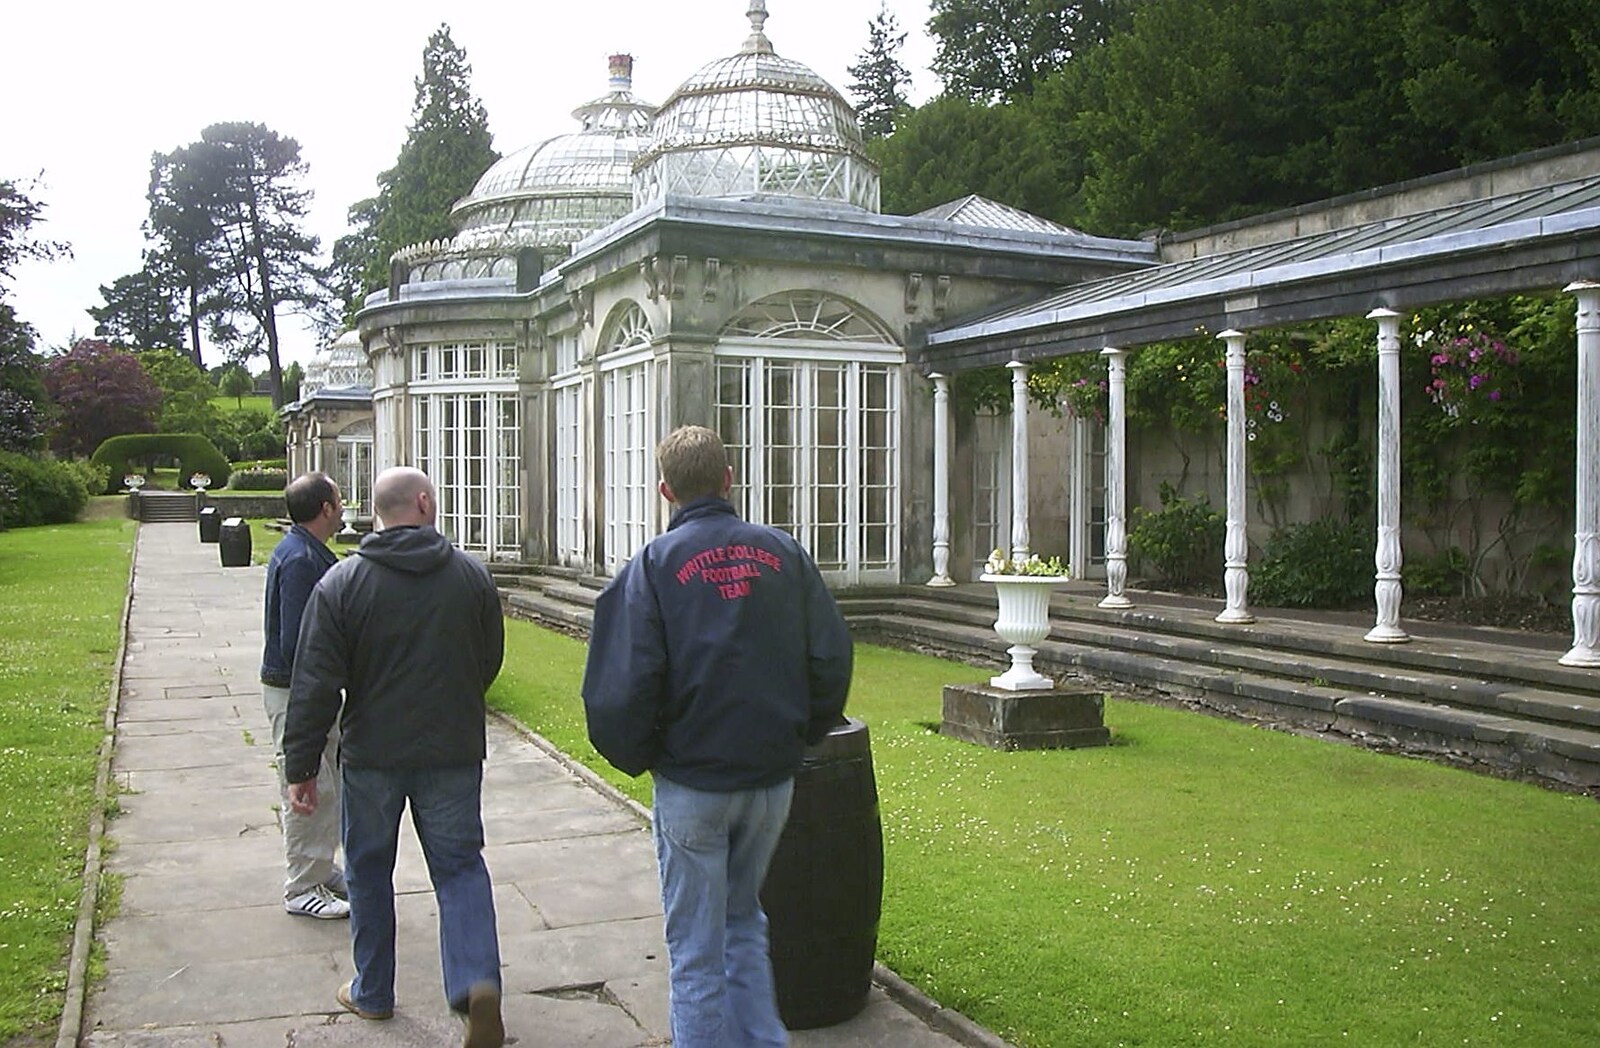 A Trip to Alton Towers, Staffordshire - 19th June 2004: Walking past the orangery